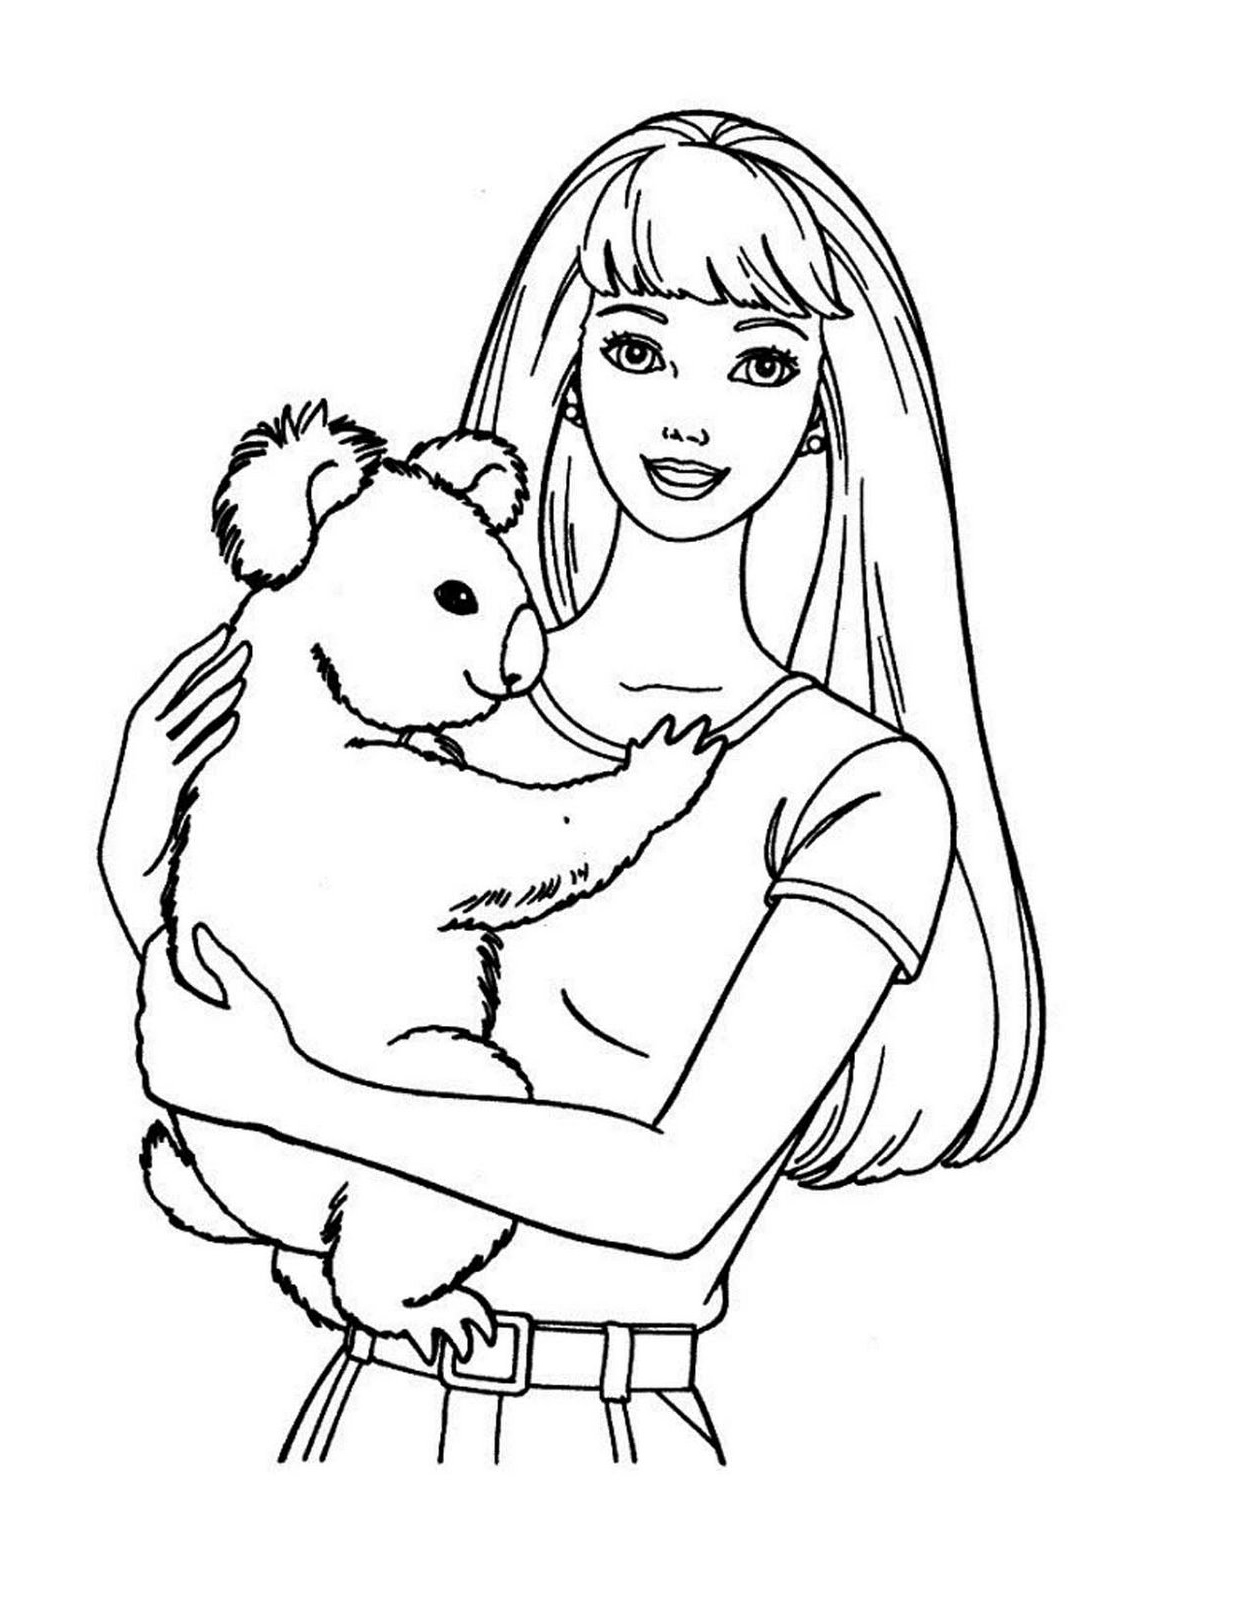 drawing-barbie-27814-cartoons-printable-coloring-pages